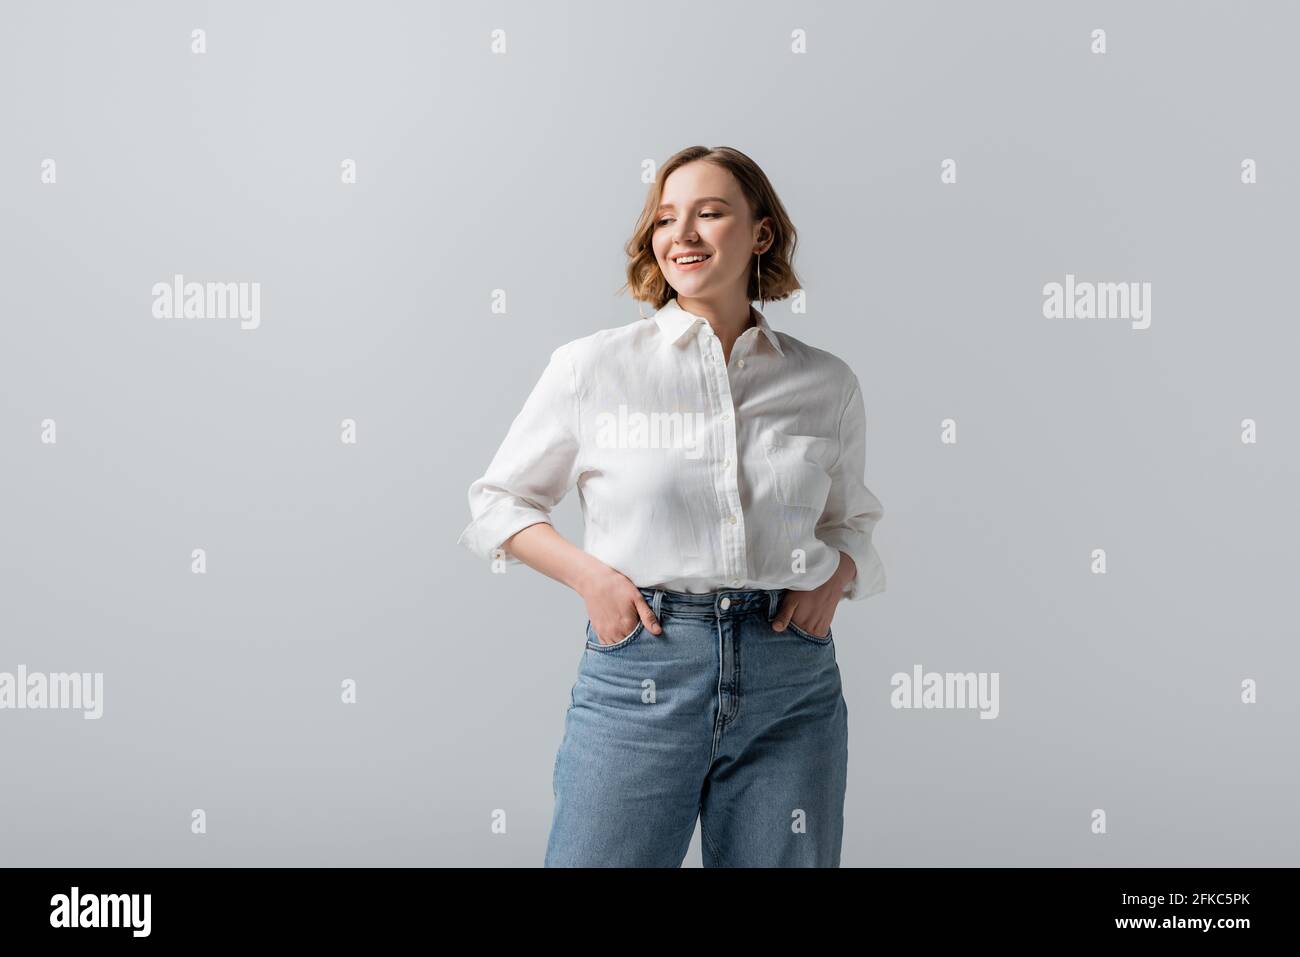 smiling overweight young woman in jeans posing with hands in pockets isolated on grey Stock Photo